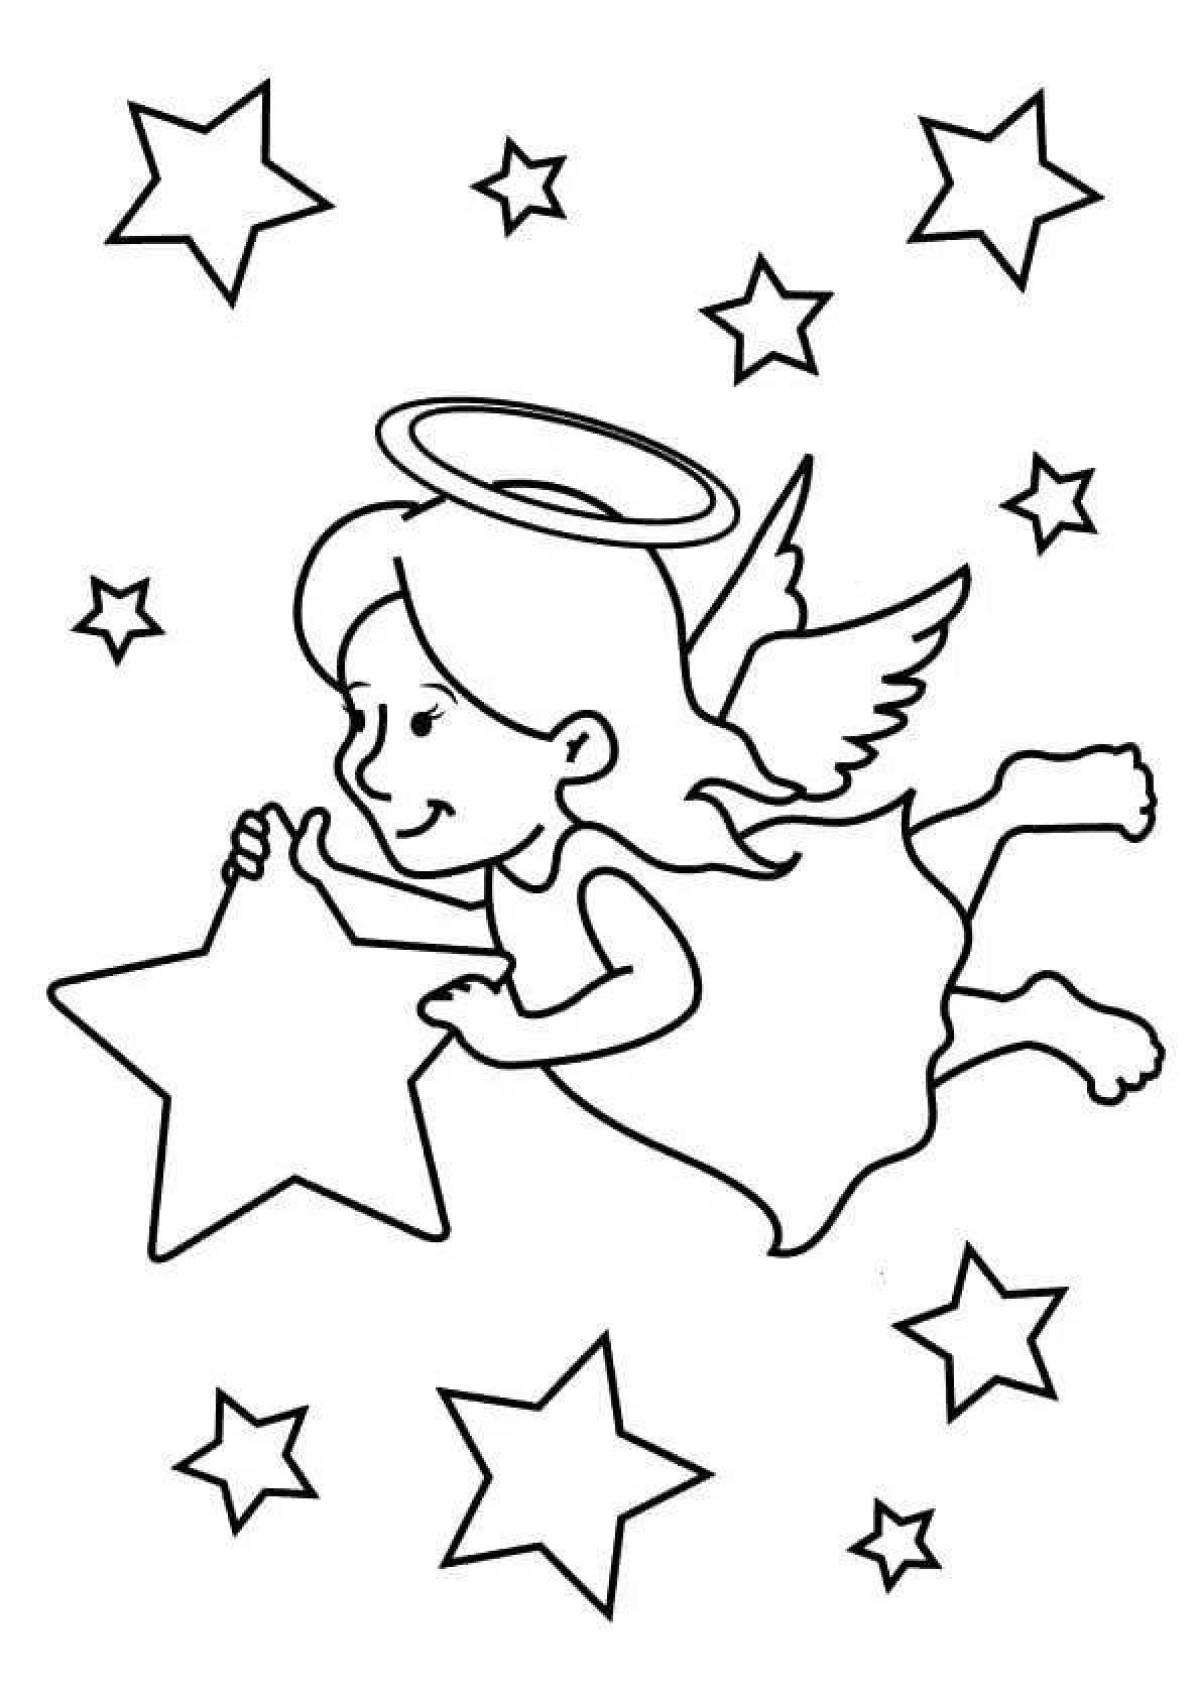 Bright Christmas angel coloring for kids